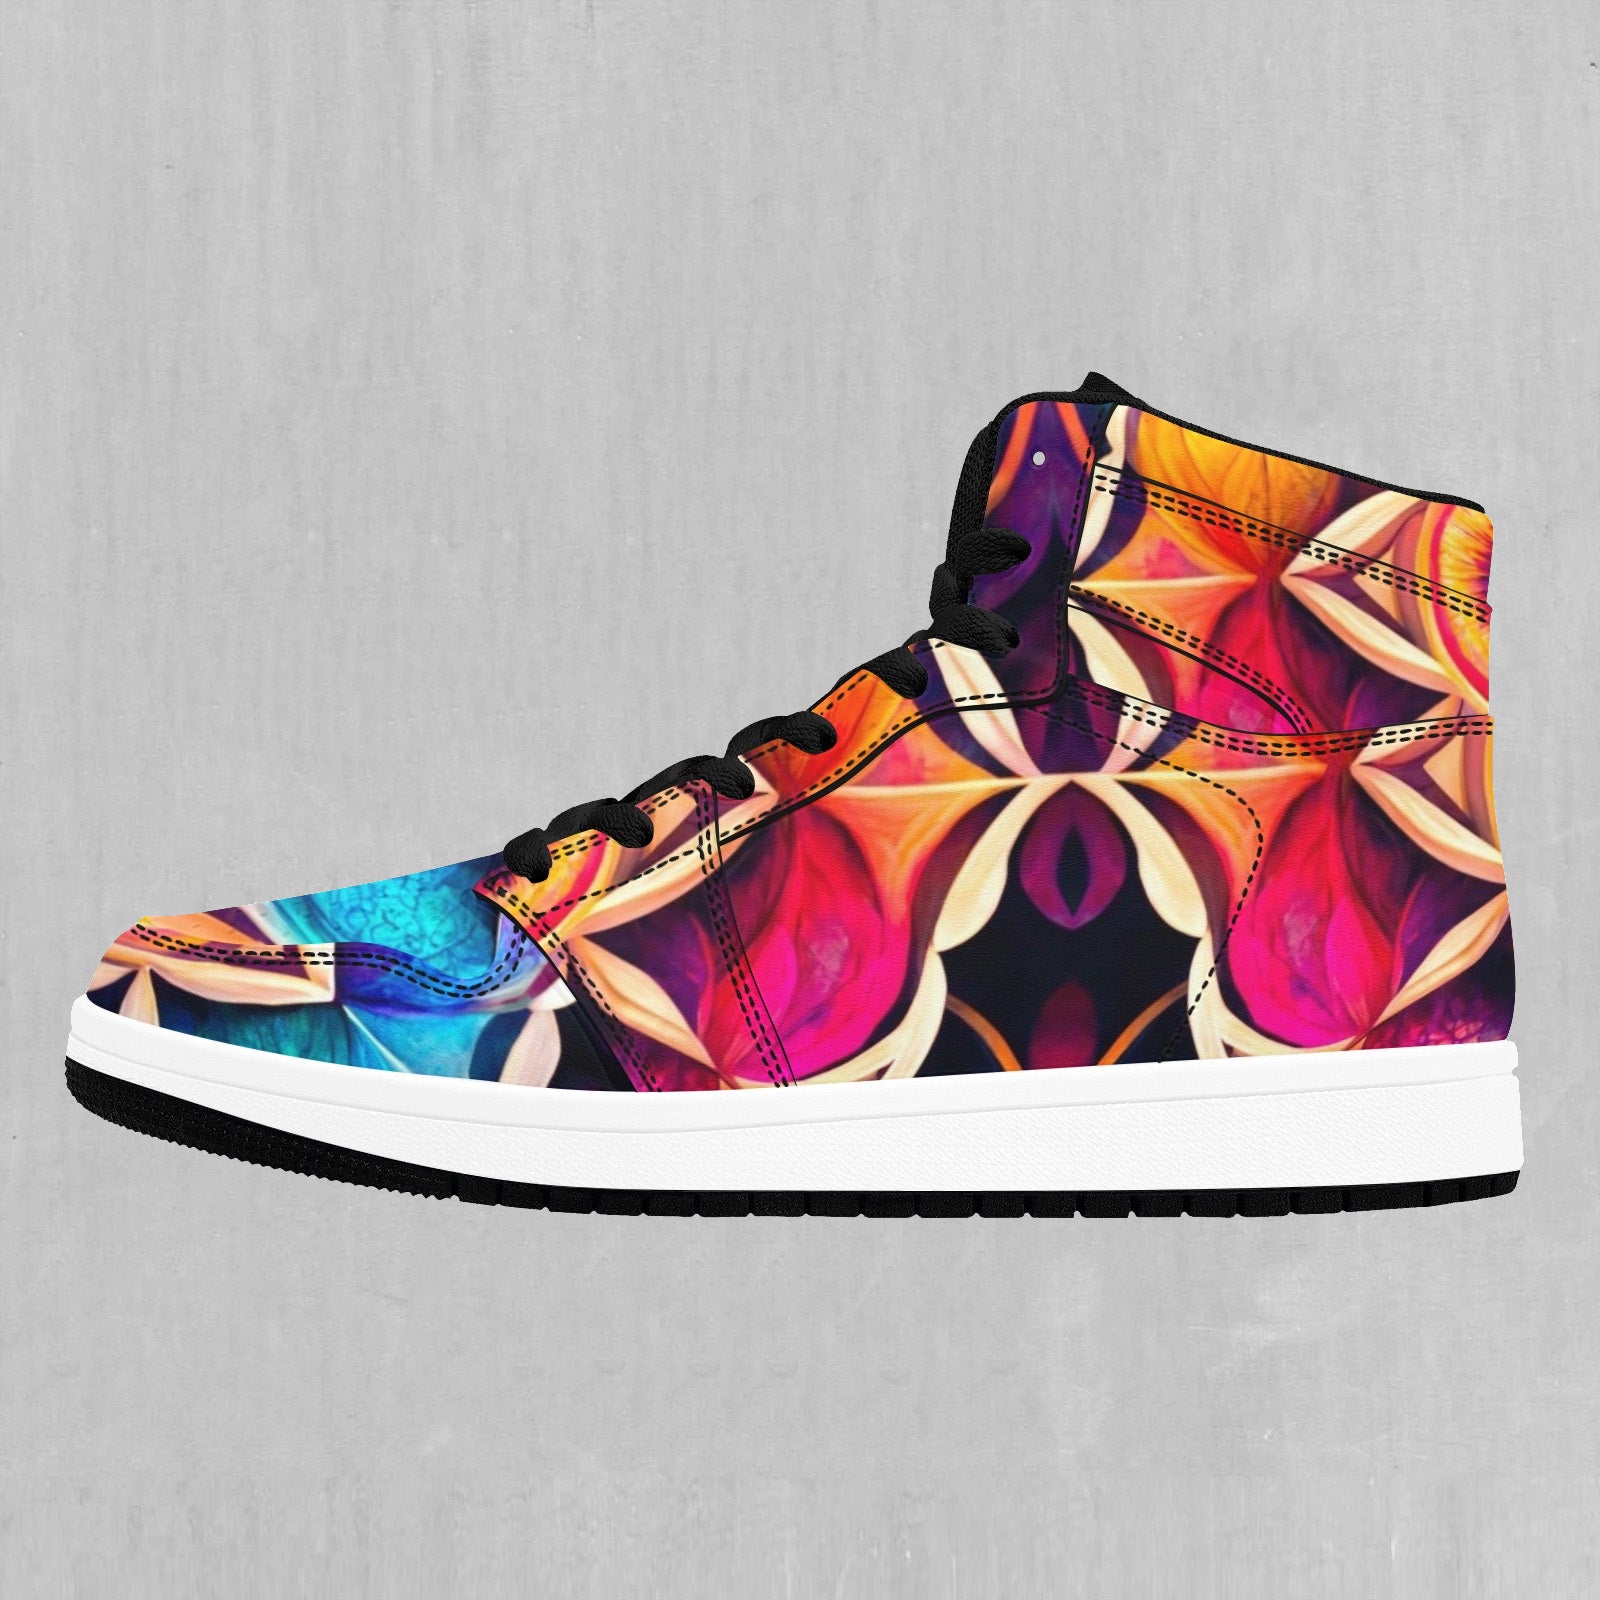 Blossoming Spectrum High Top Sneakers